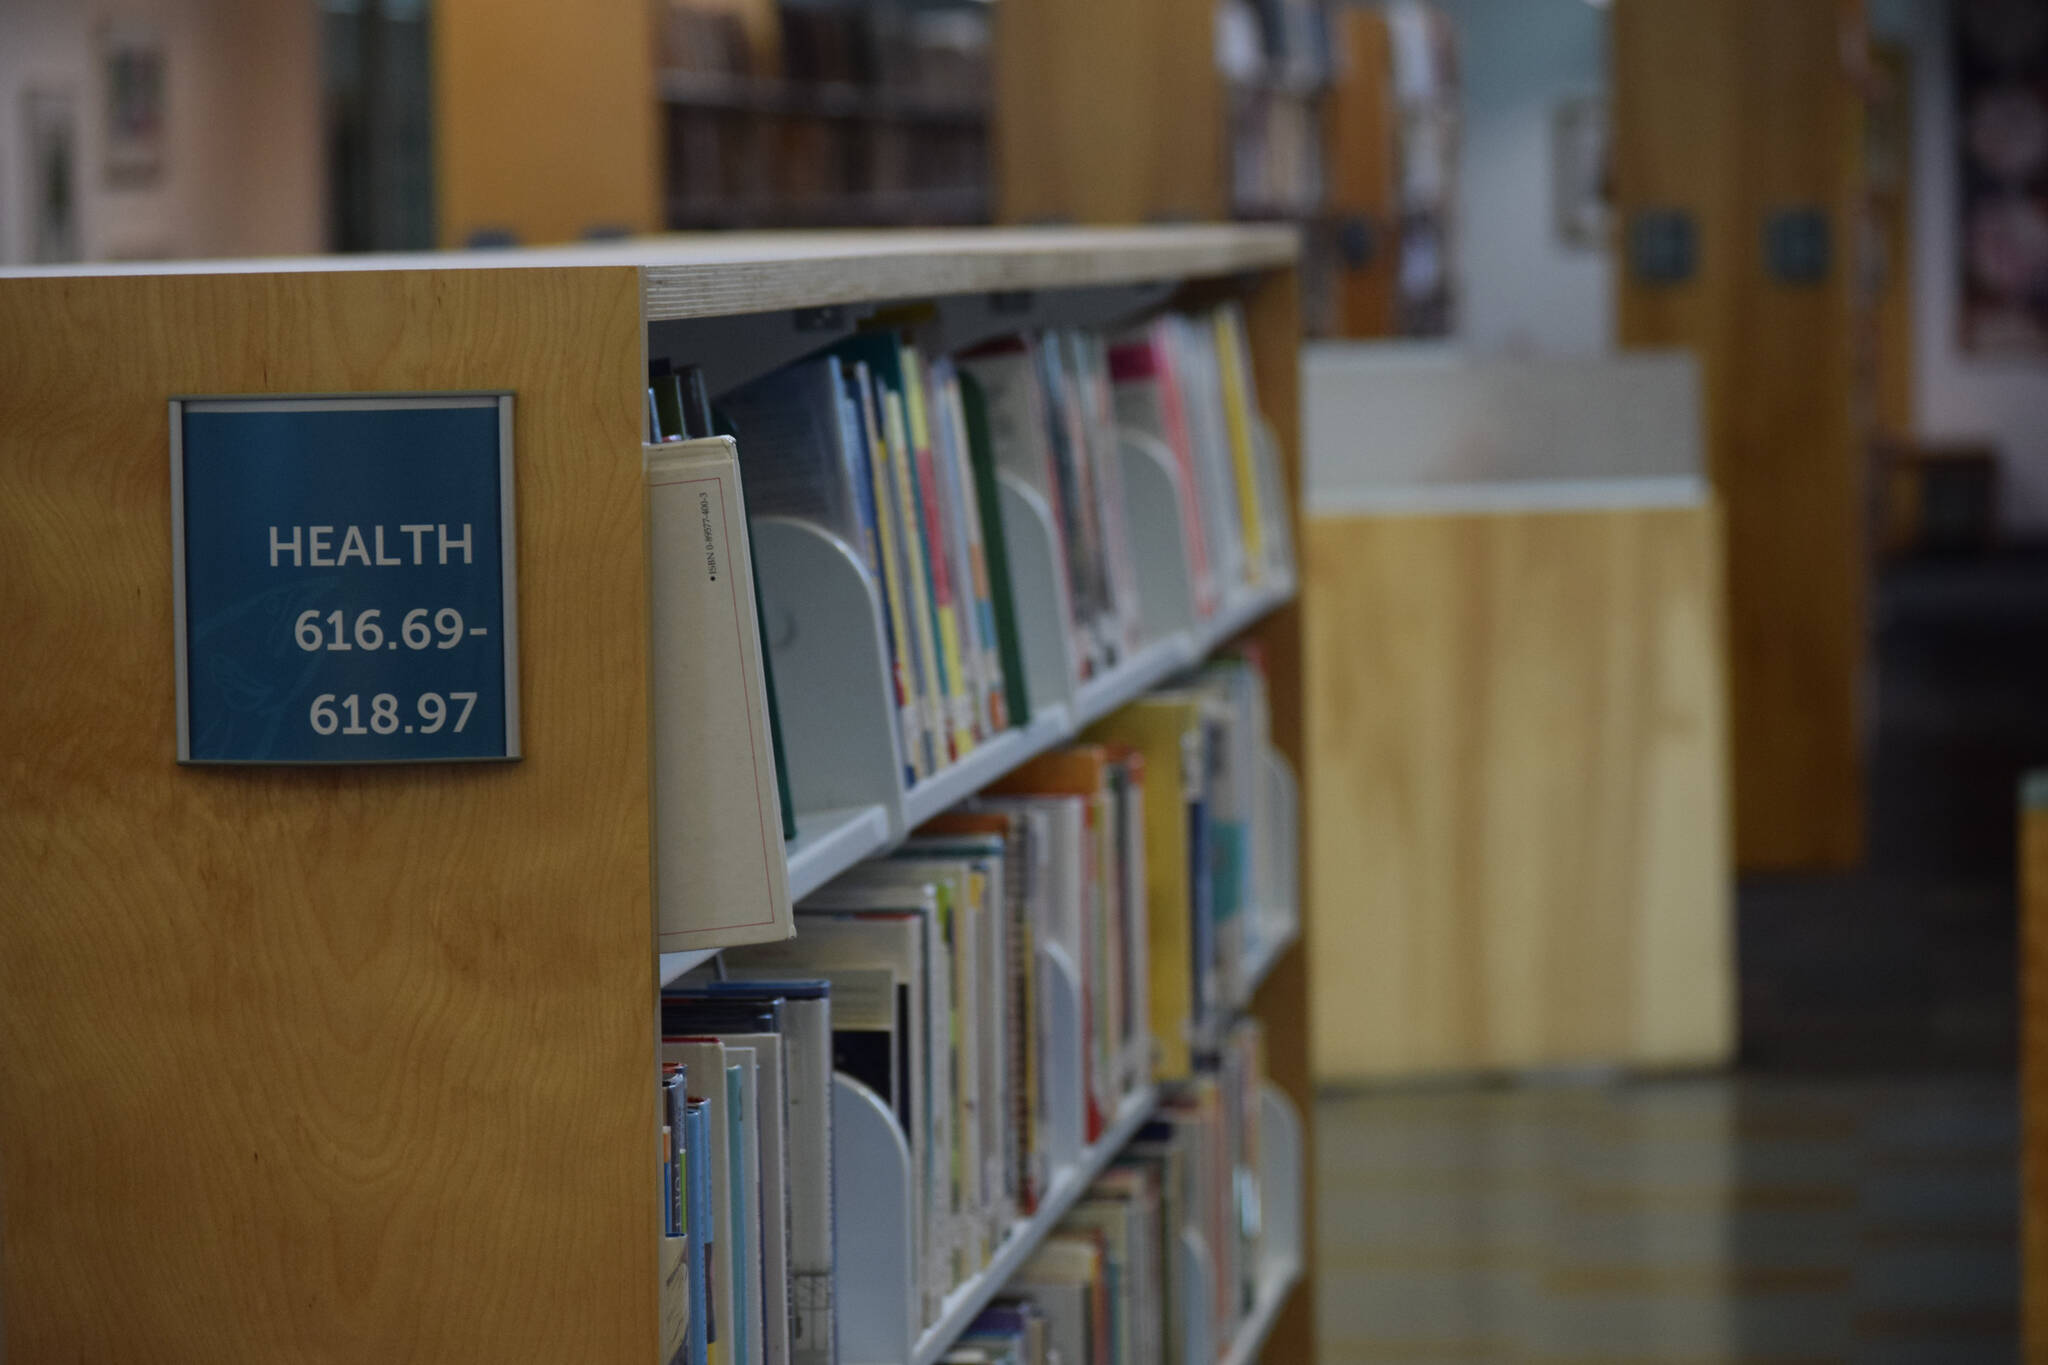 The Kenai Community Library health section is seen on Tuesday, Oct. 26, 2021. After the Kenai City Council postponed a vote to approve a grant funding health and wellness book, community members set up a GoFundMe to support the purchase of materials. (Camille Botello/Peninsula Clarion)